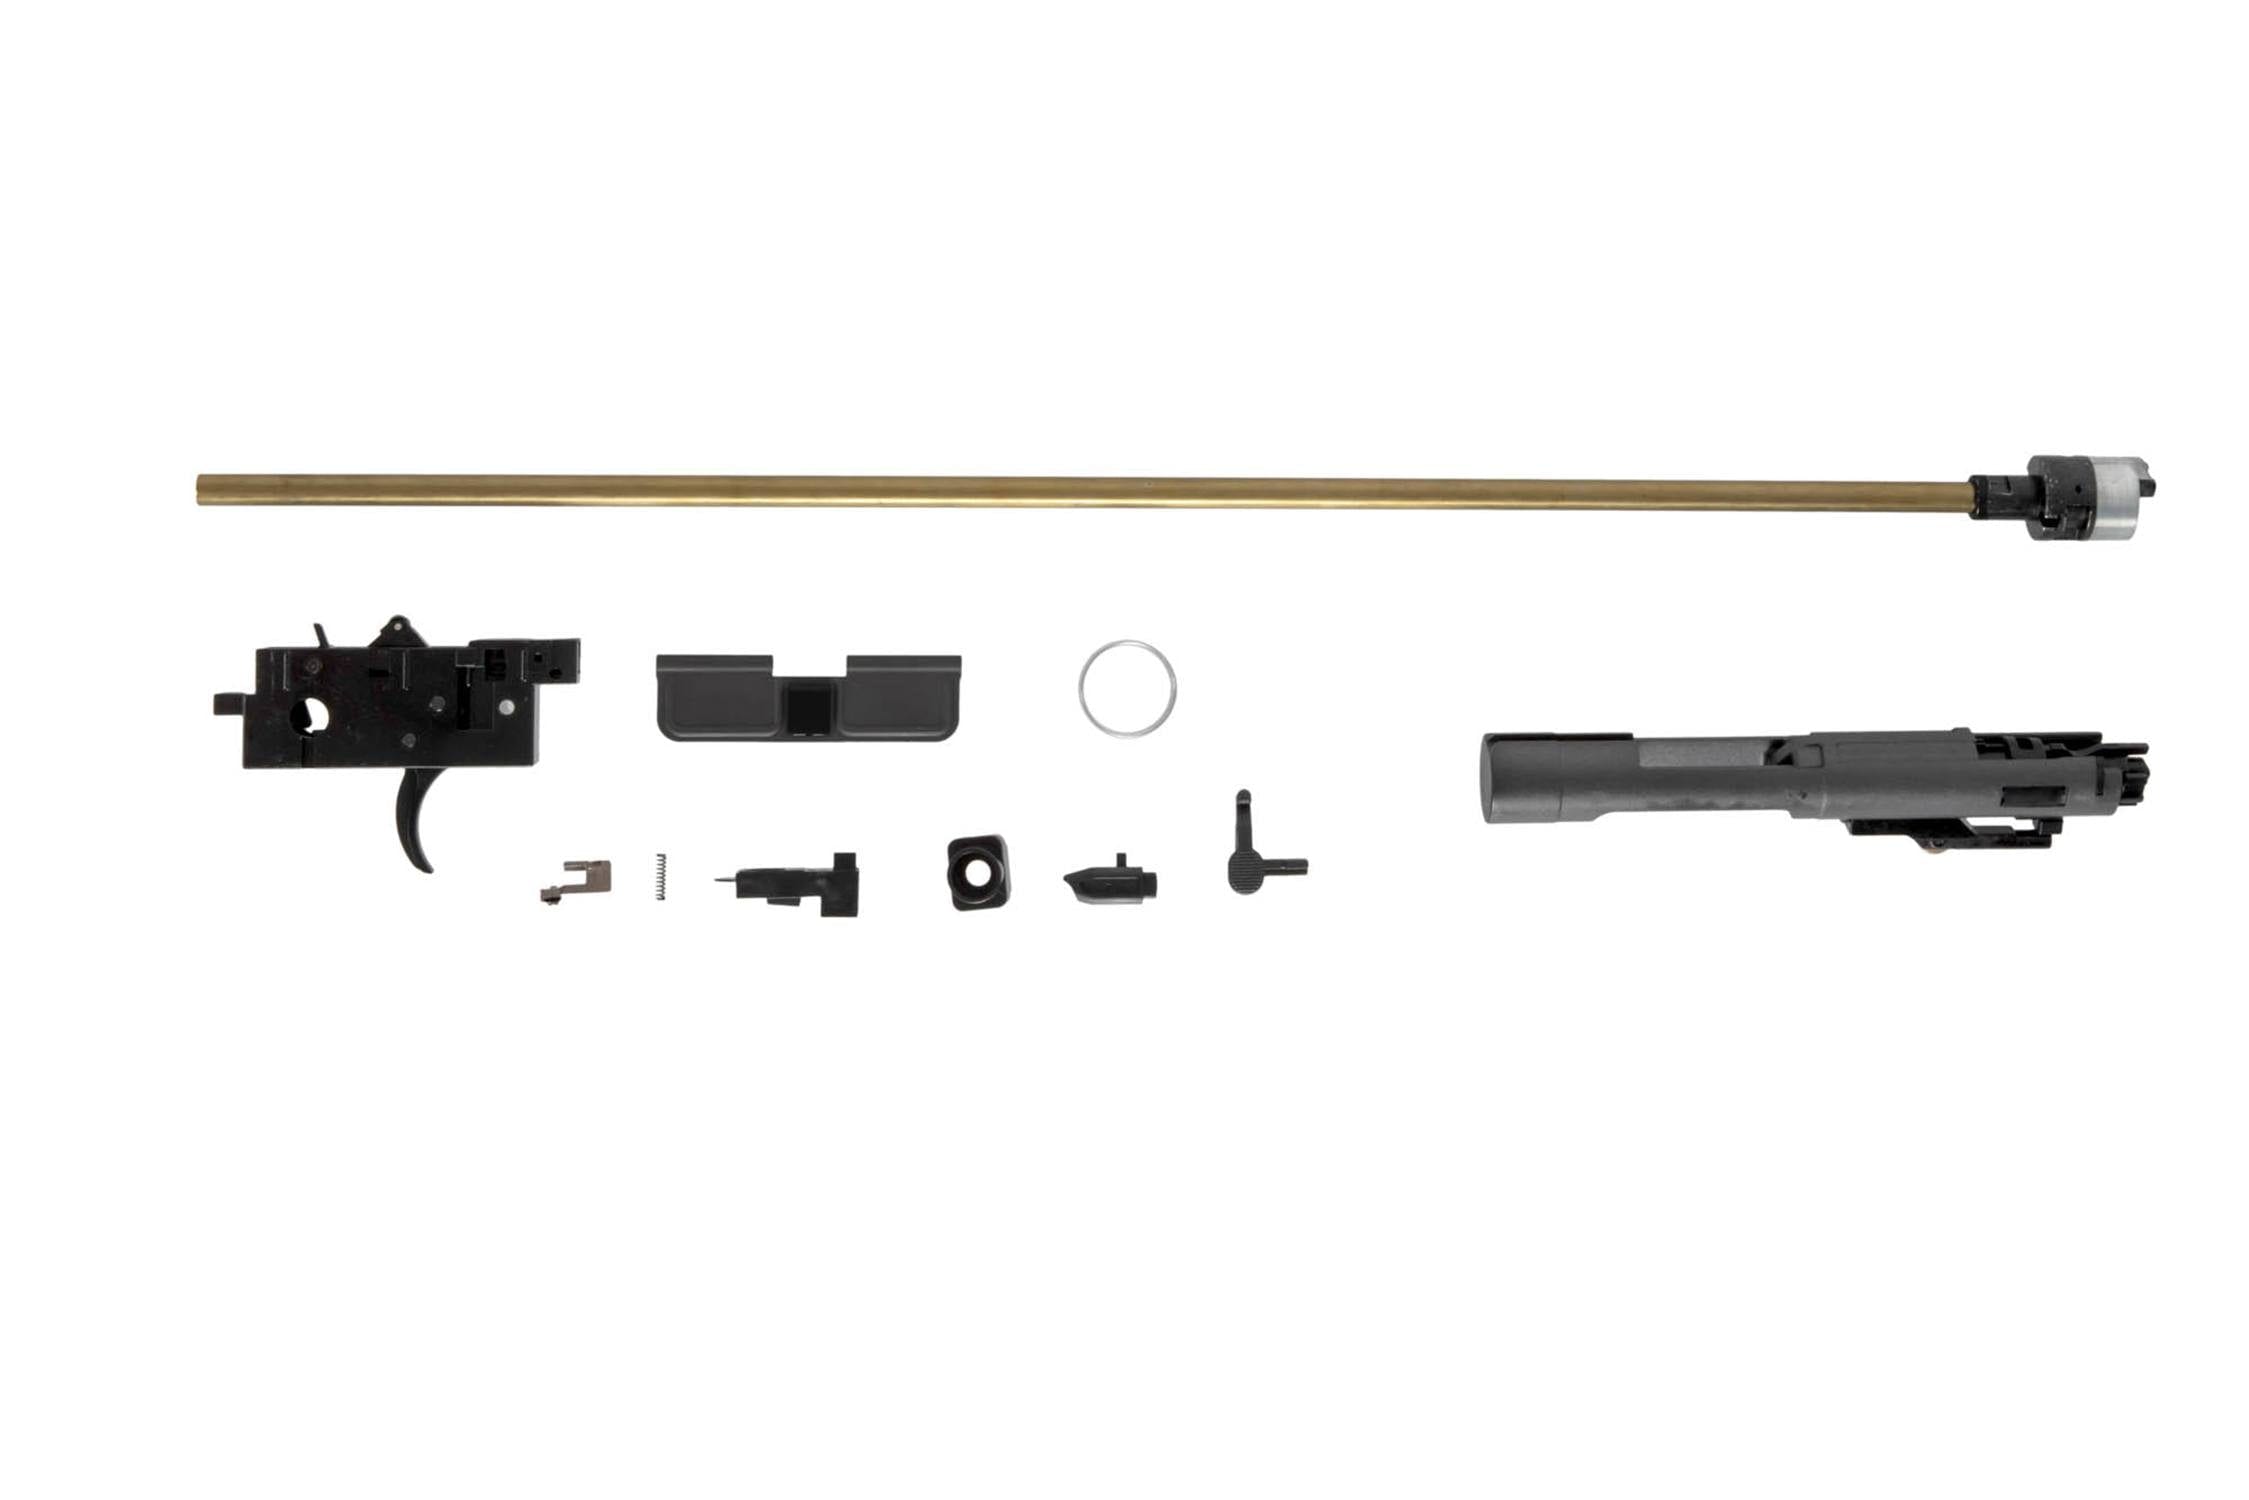 Open Bolt Set for WE M16 GBBR replicas by WE on Airsoft Mania Europe